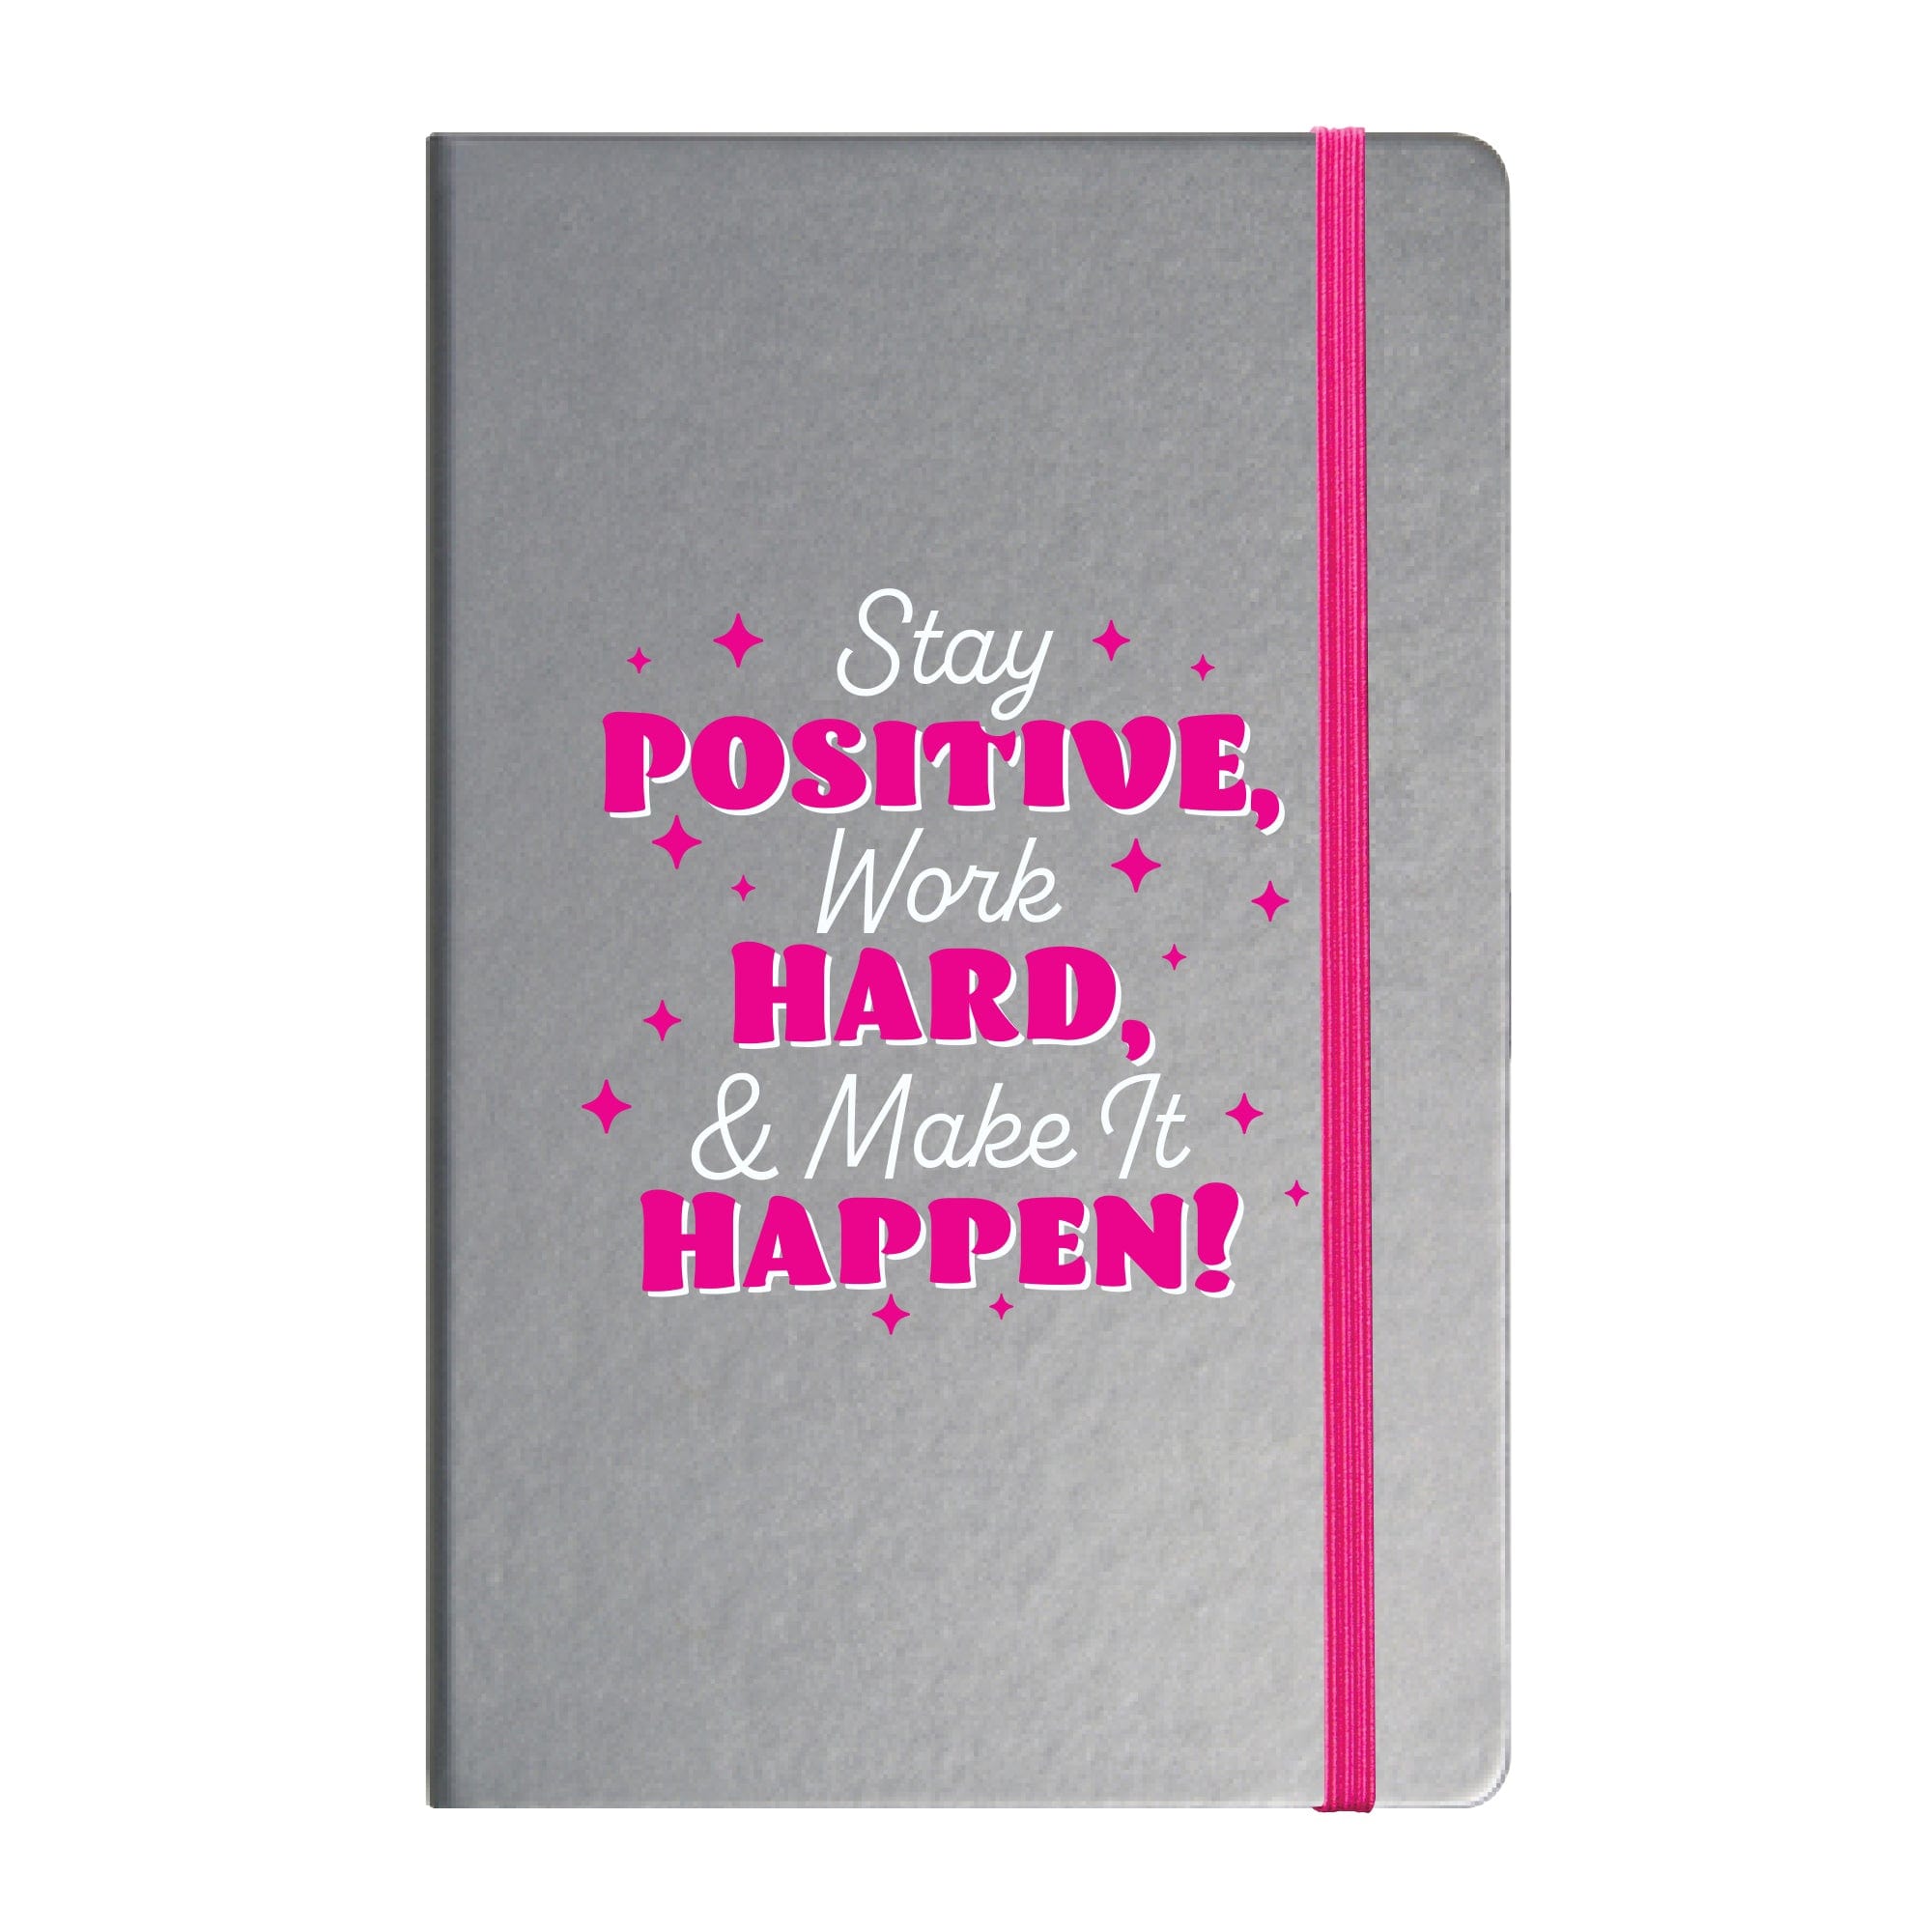 Set for Success Journal with Pink Strap - Stay Positive